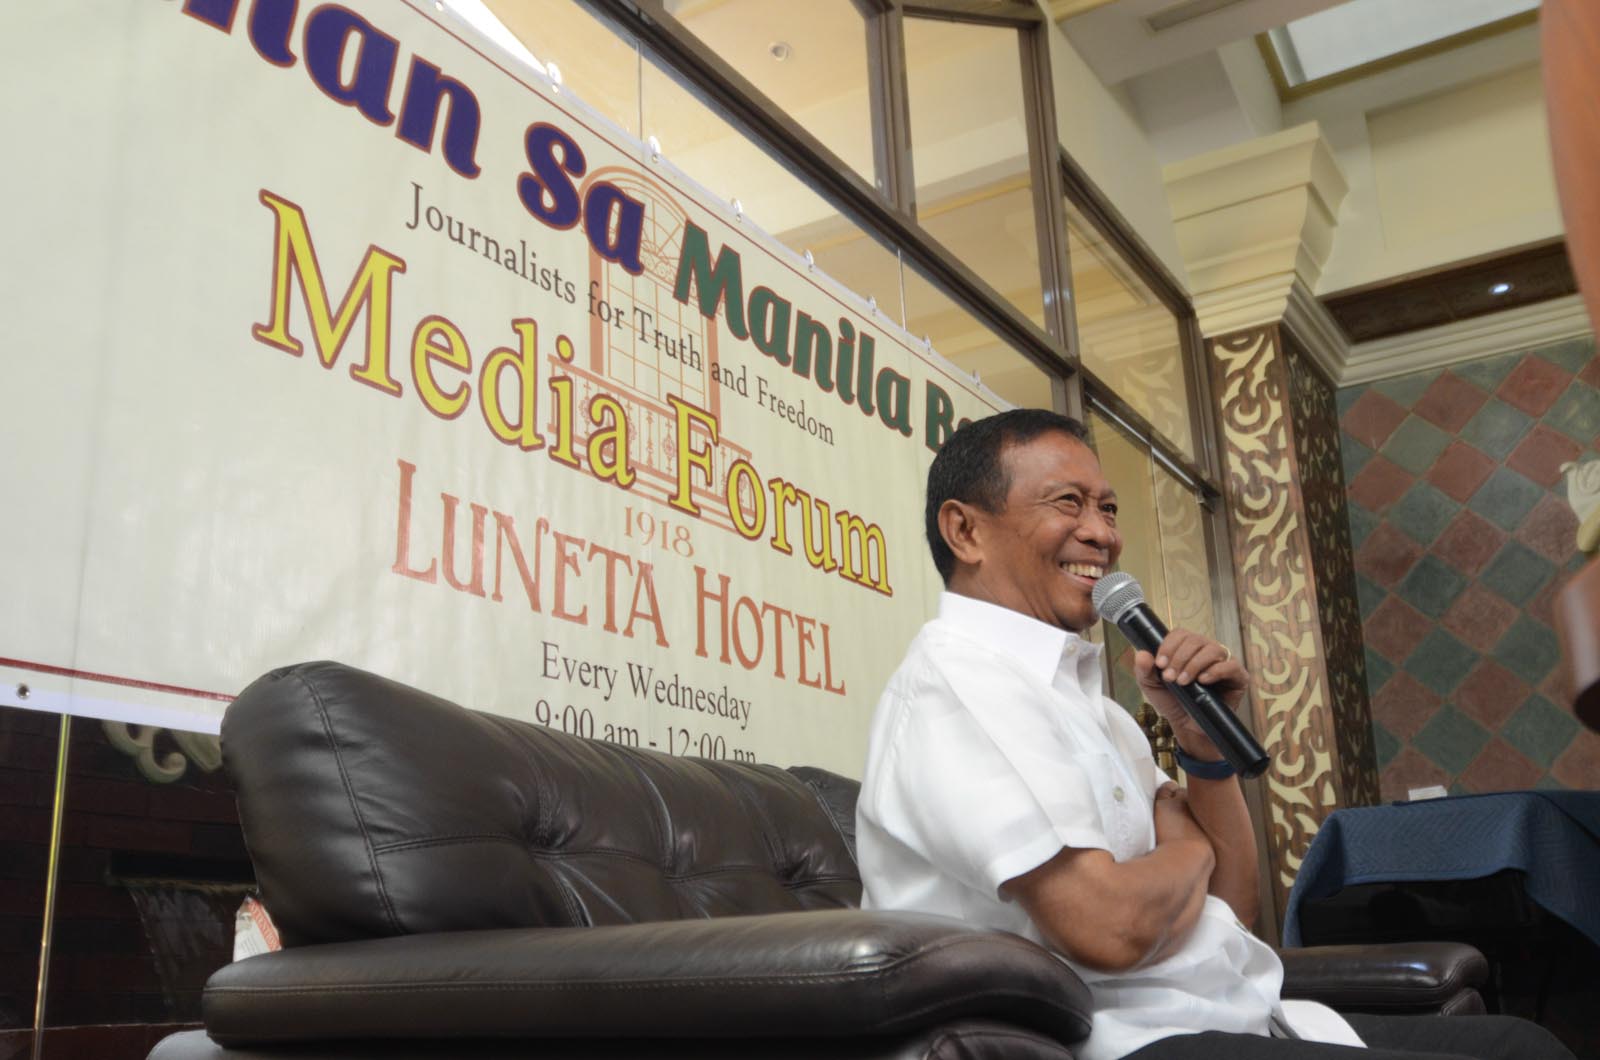 BINAY'S HOPE. Vice President Jejomar Binay tells media his hope in relation to the 2016 elections in a forum at the Luneta Hotel on June 10, 2015. Photo by Alecs Ongcal/Rappler  